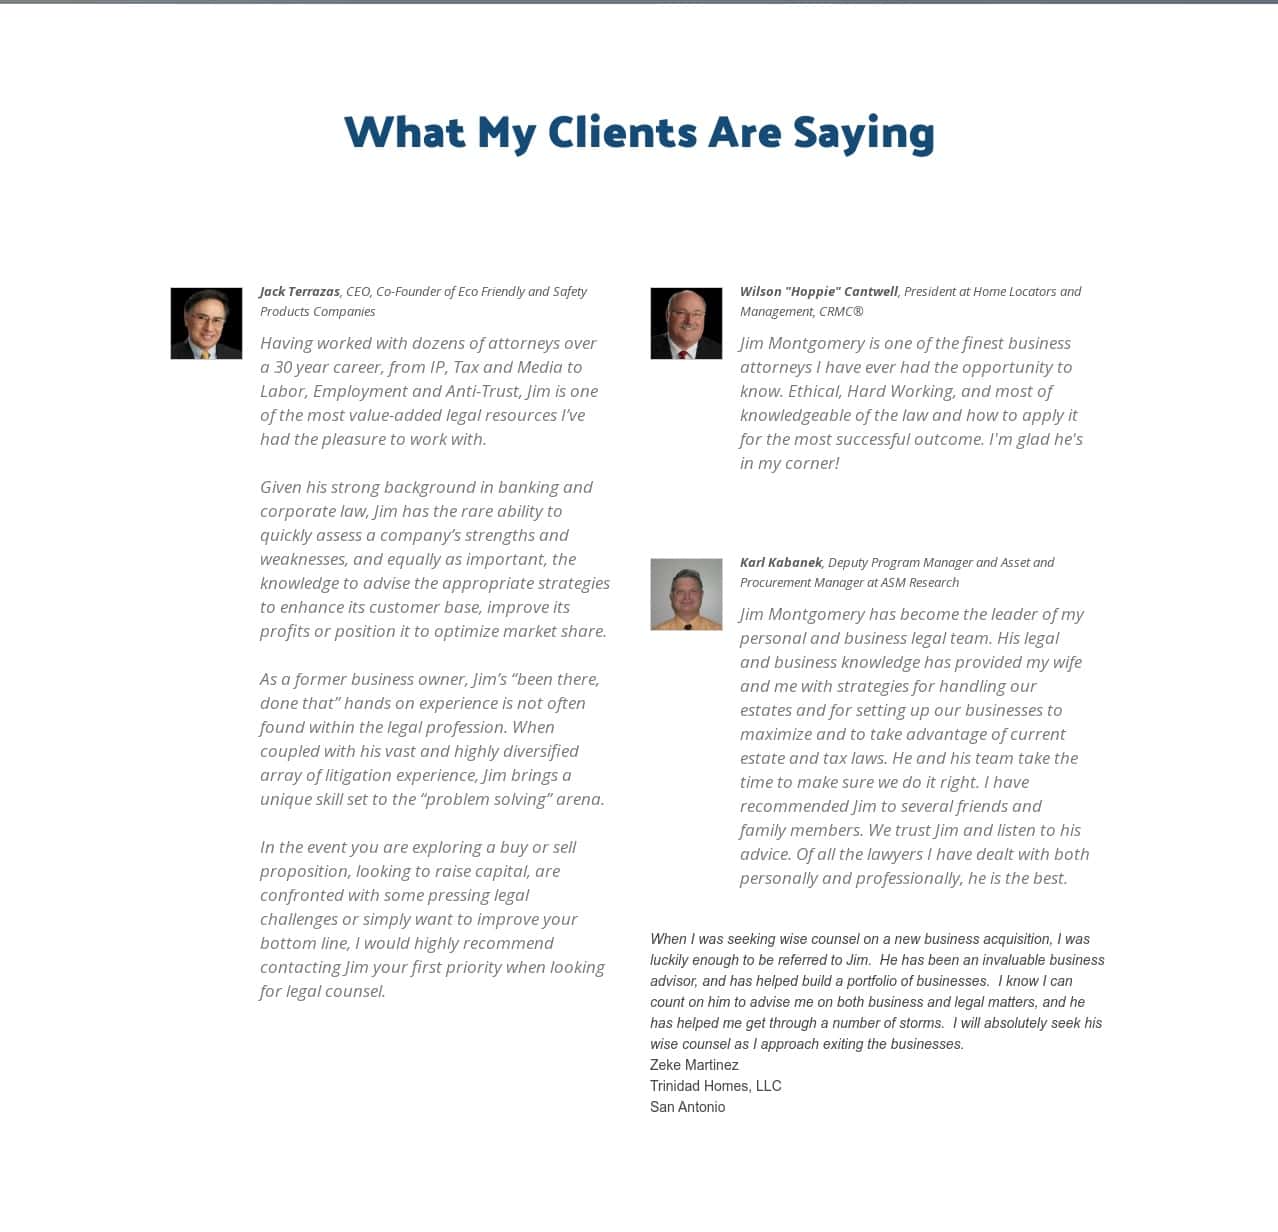 What my clients are saying